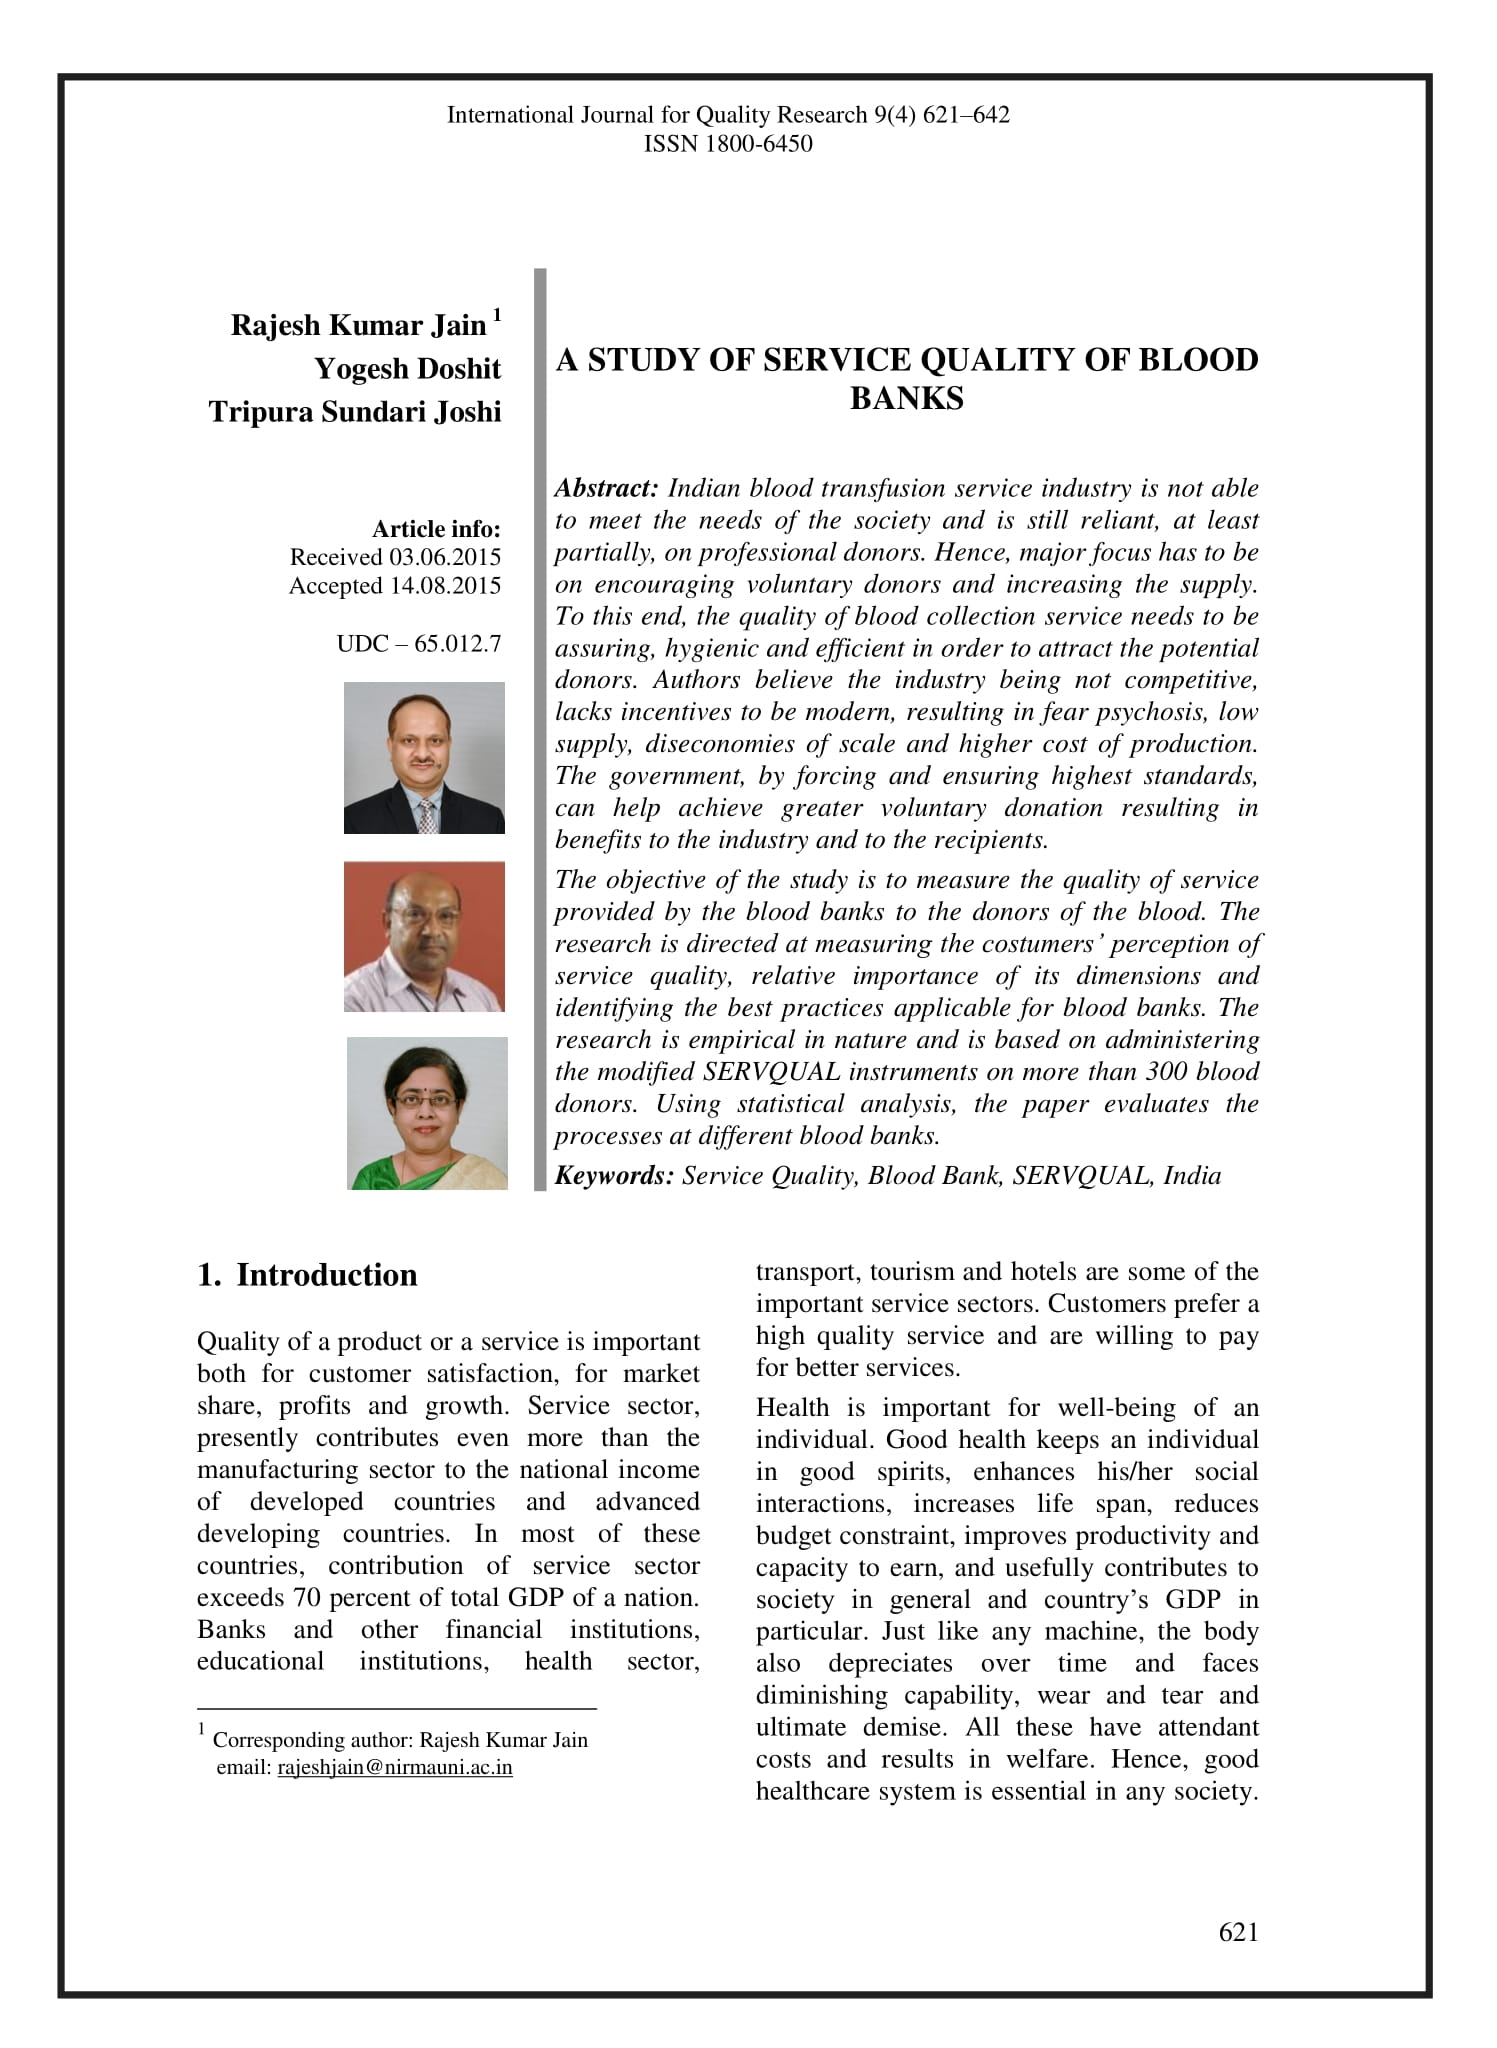 A Study of Service Quality of Blood Banks